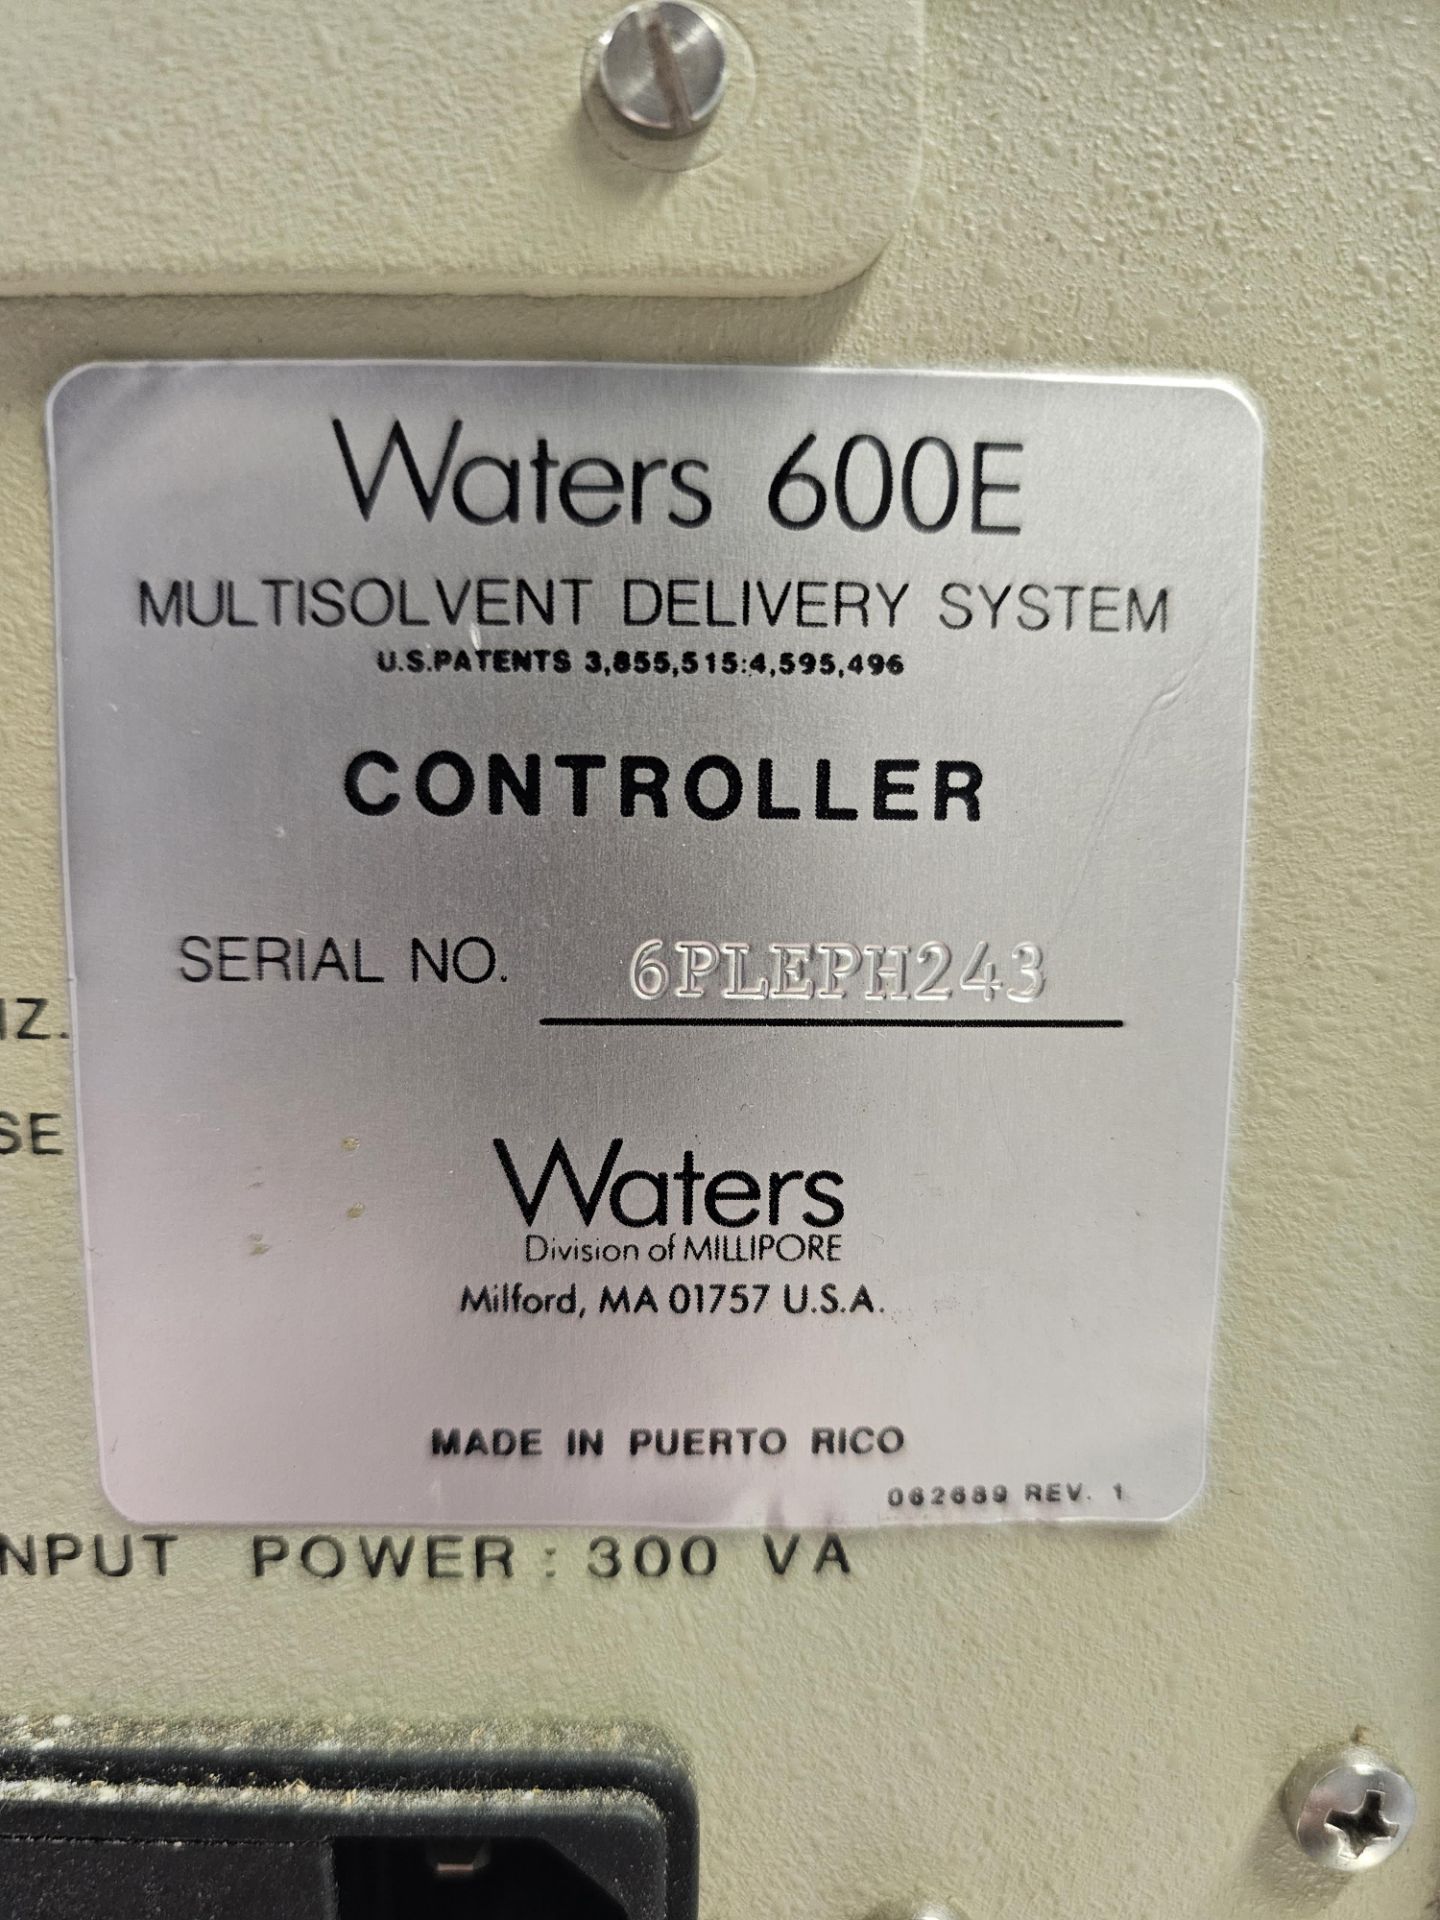 Waters Model 600E Multisolvent Delivery System Controller sn 6PHELPH243 Bldg Loc: Location 6 This - Image 5 of 5